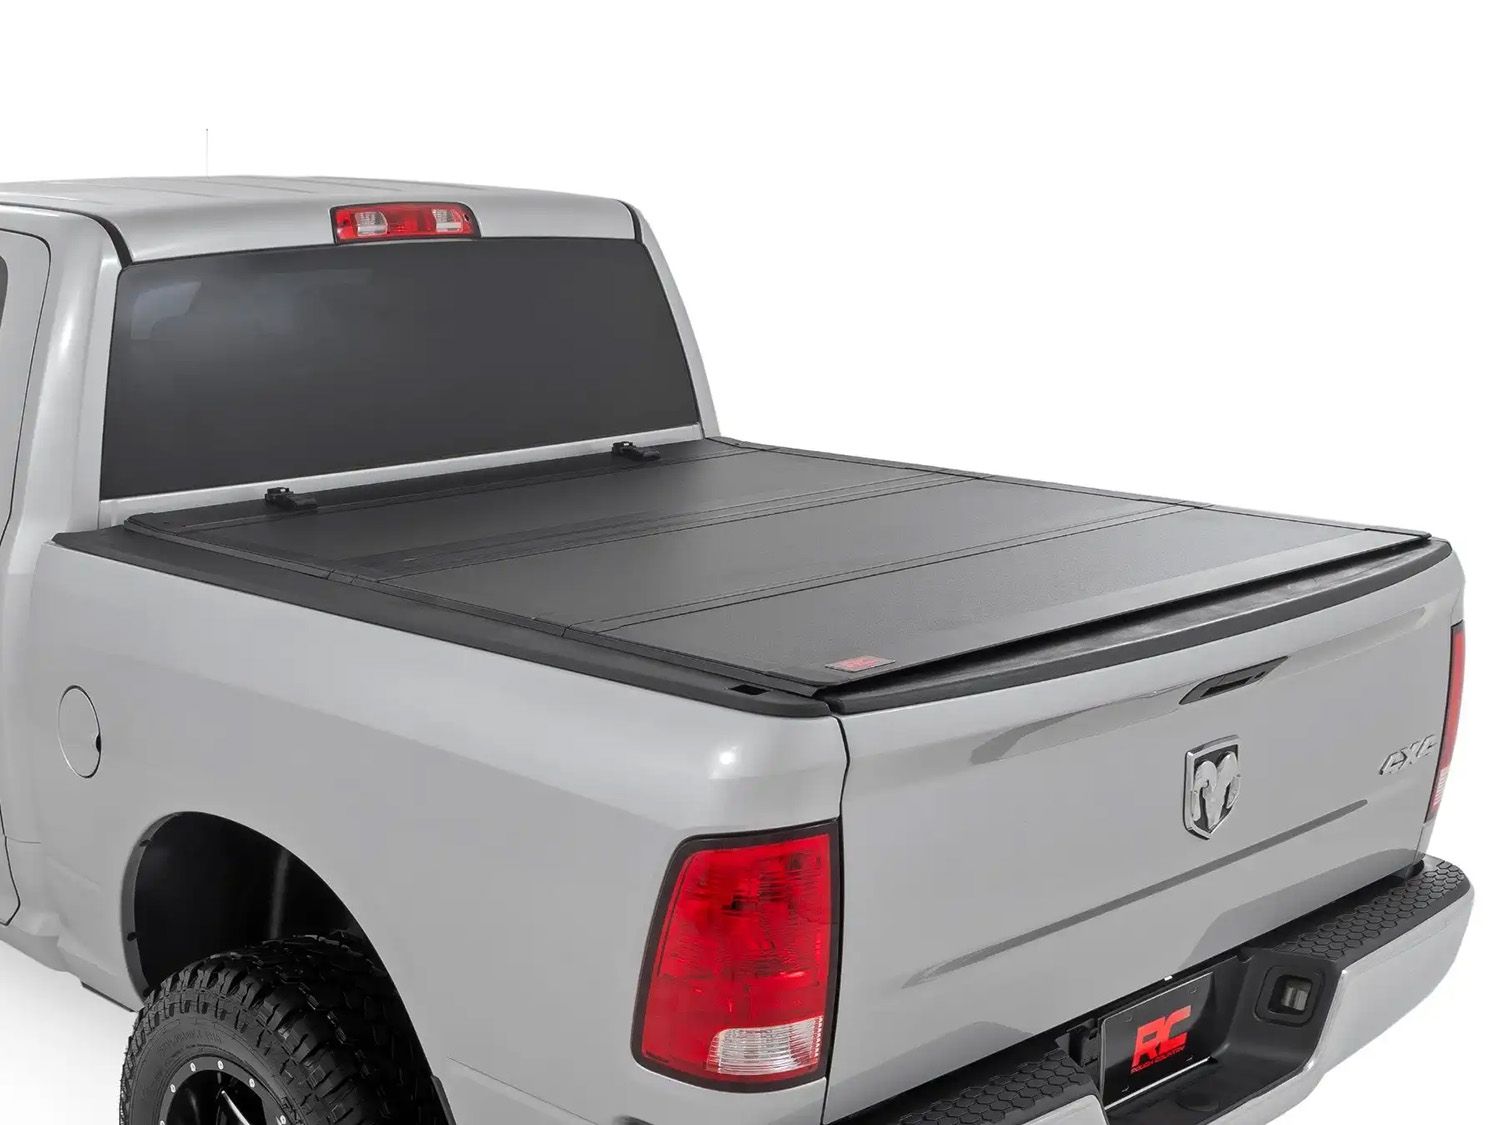 2009-2018 Dodge Ram 1500 Hard Tri-Fold Flip Up Tonneau Cover by Rough Country